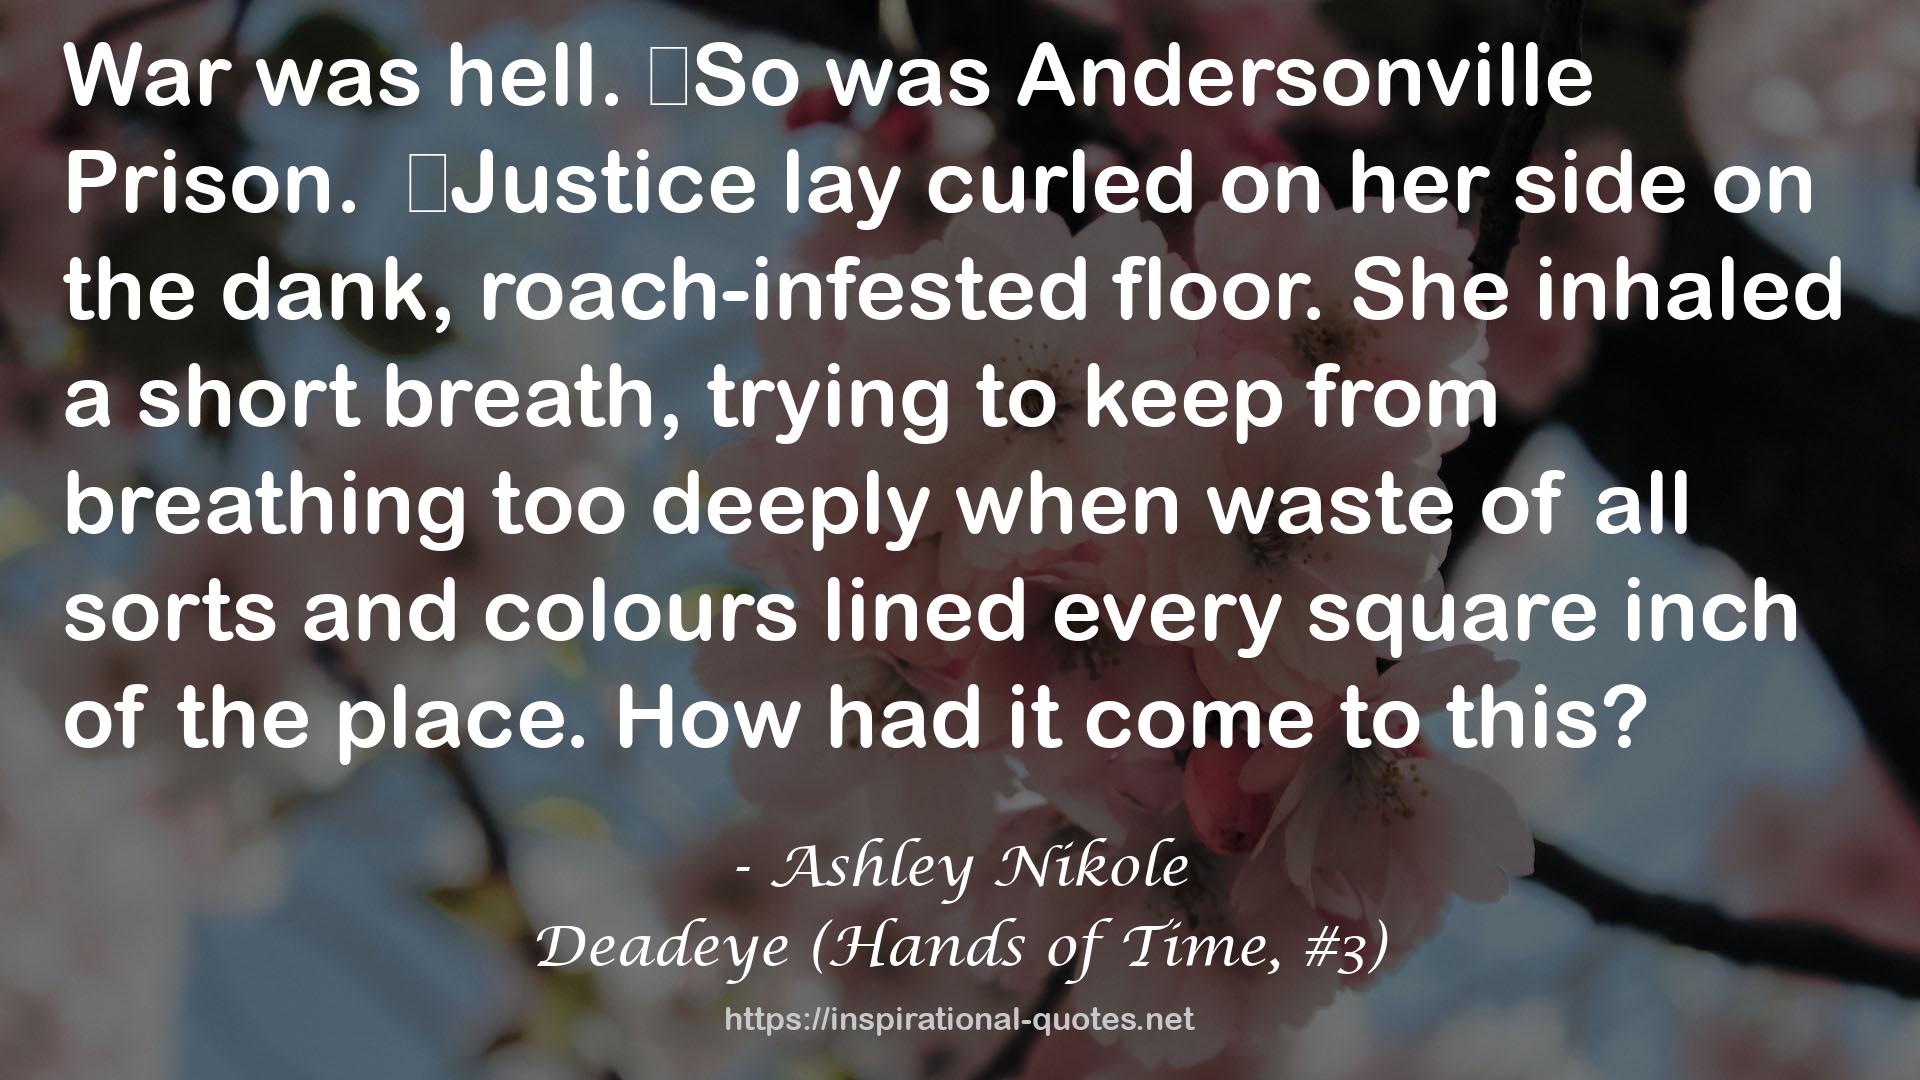 Deadeye (Hands of Time, #3) QUOTES